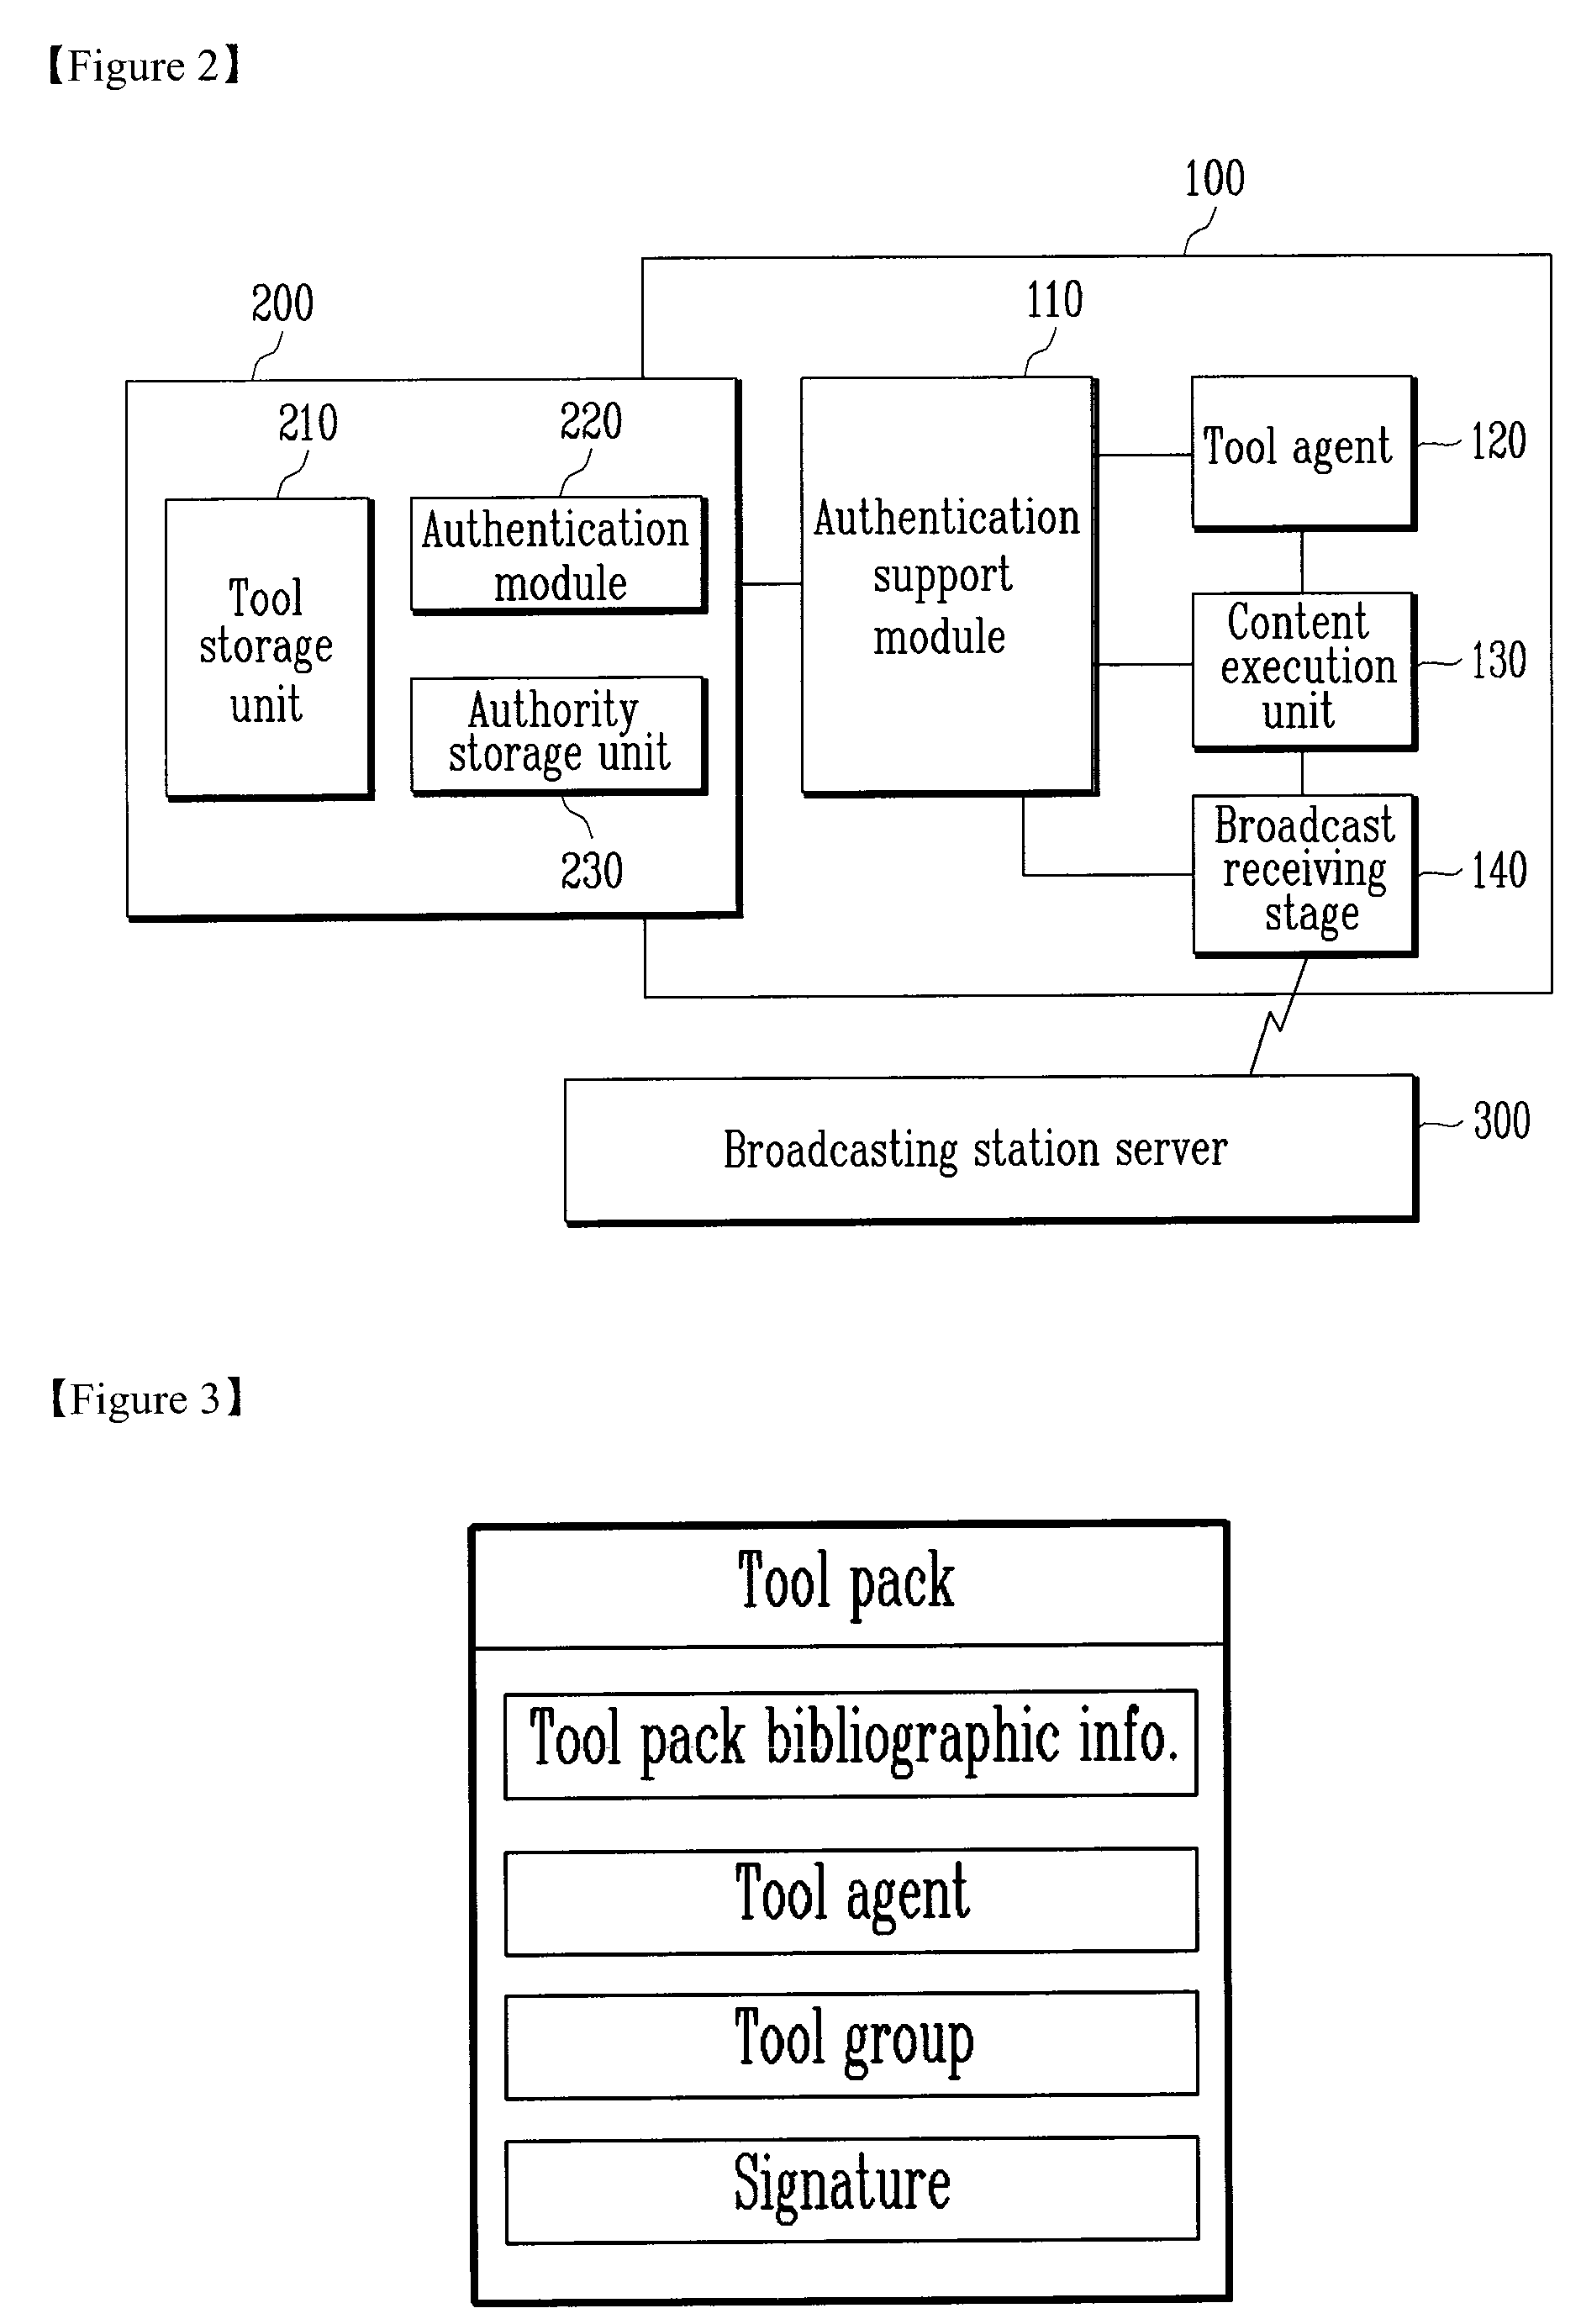 Contents Execution Device Equipped With Independent Authentication Means And Contents Re-Distribution Method